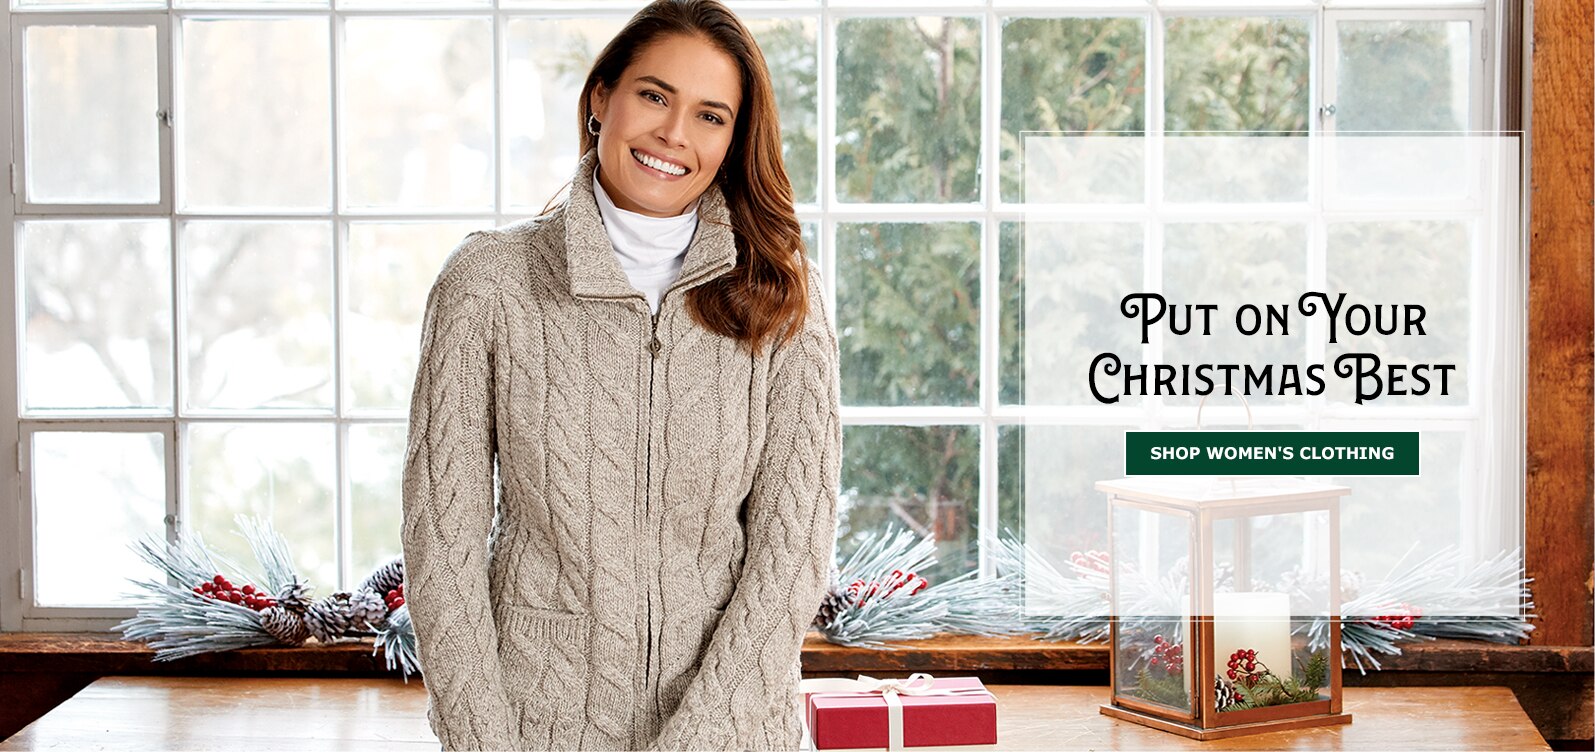 Put on Your Christmas Best. Shop Women's Clothing